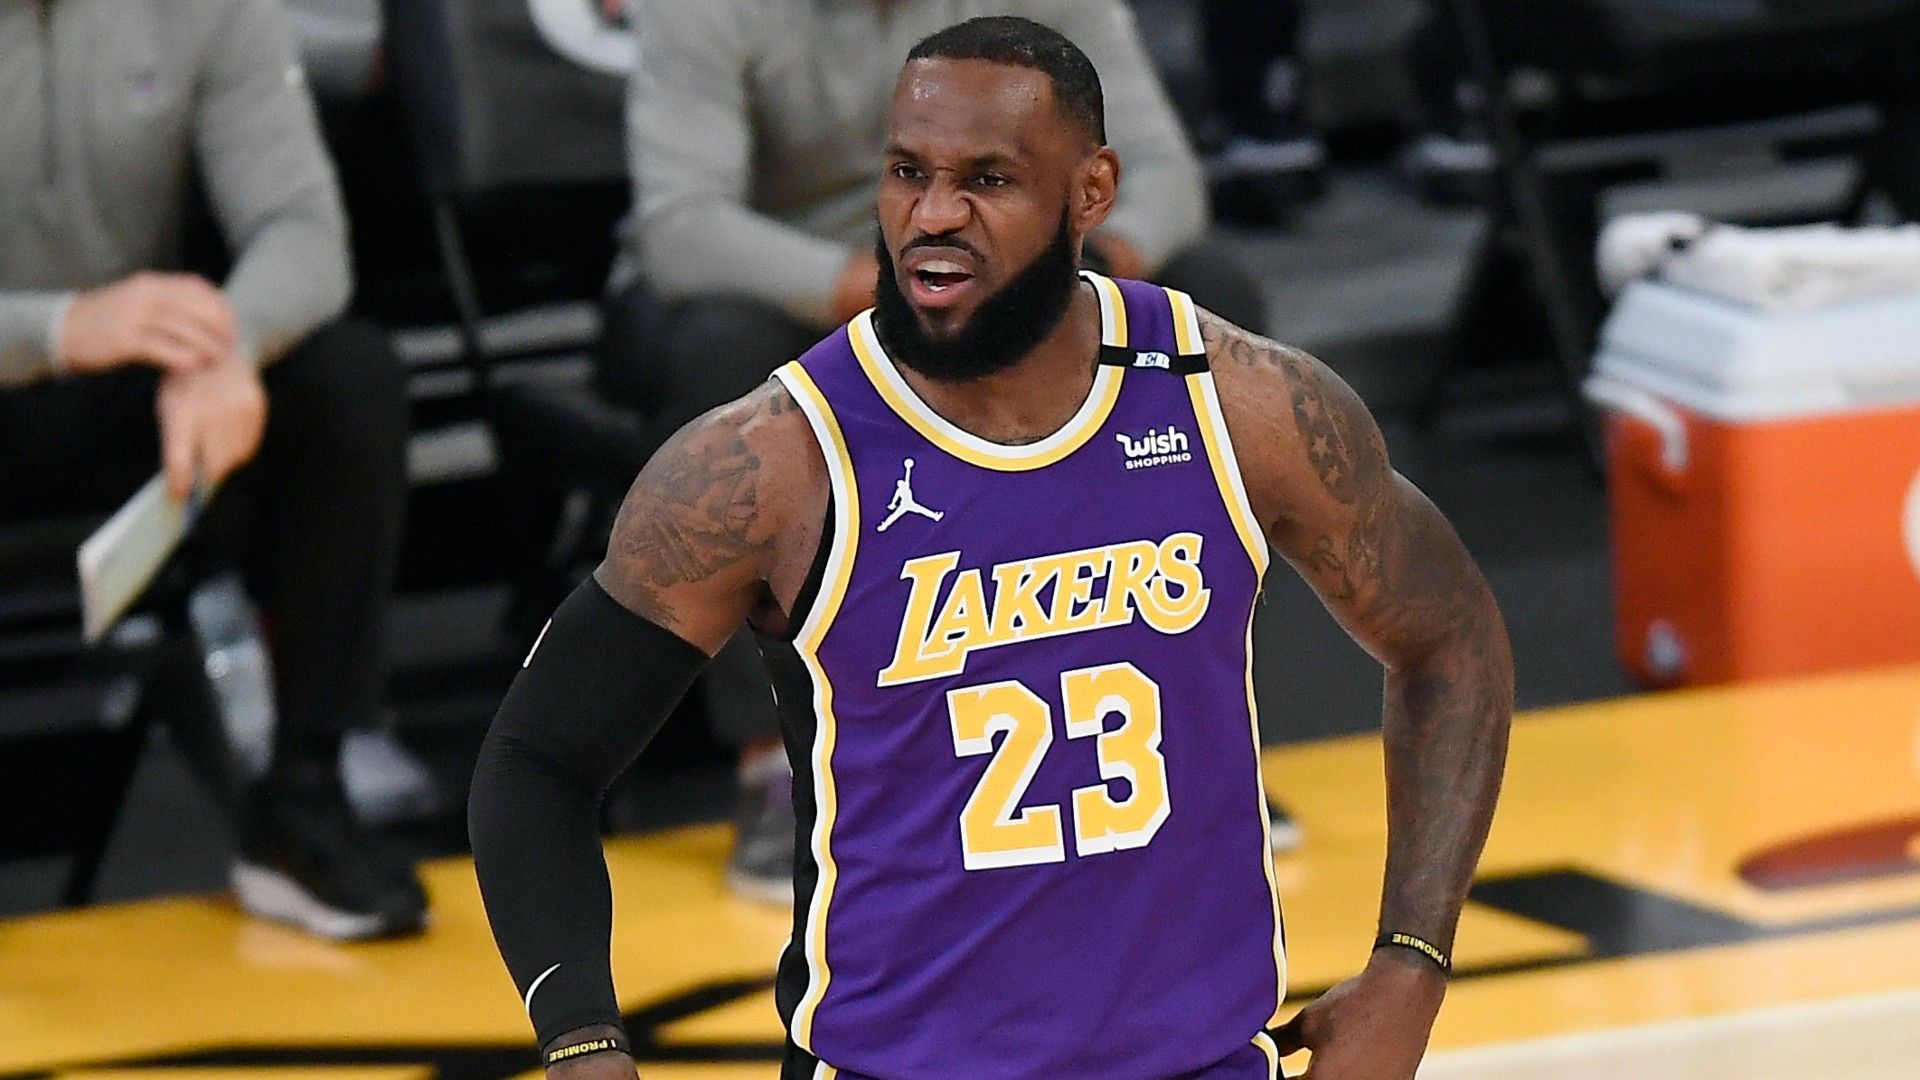 LeBron James number change: Lakers star reportedly will ditch 23 jersey after 'Space Jam'